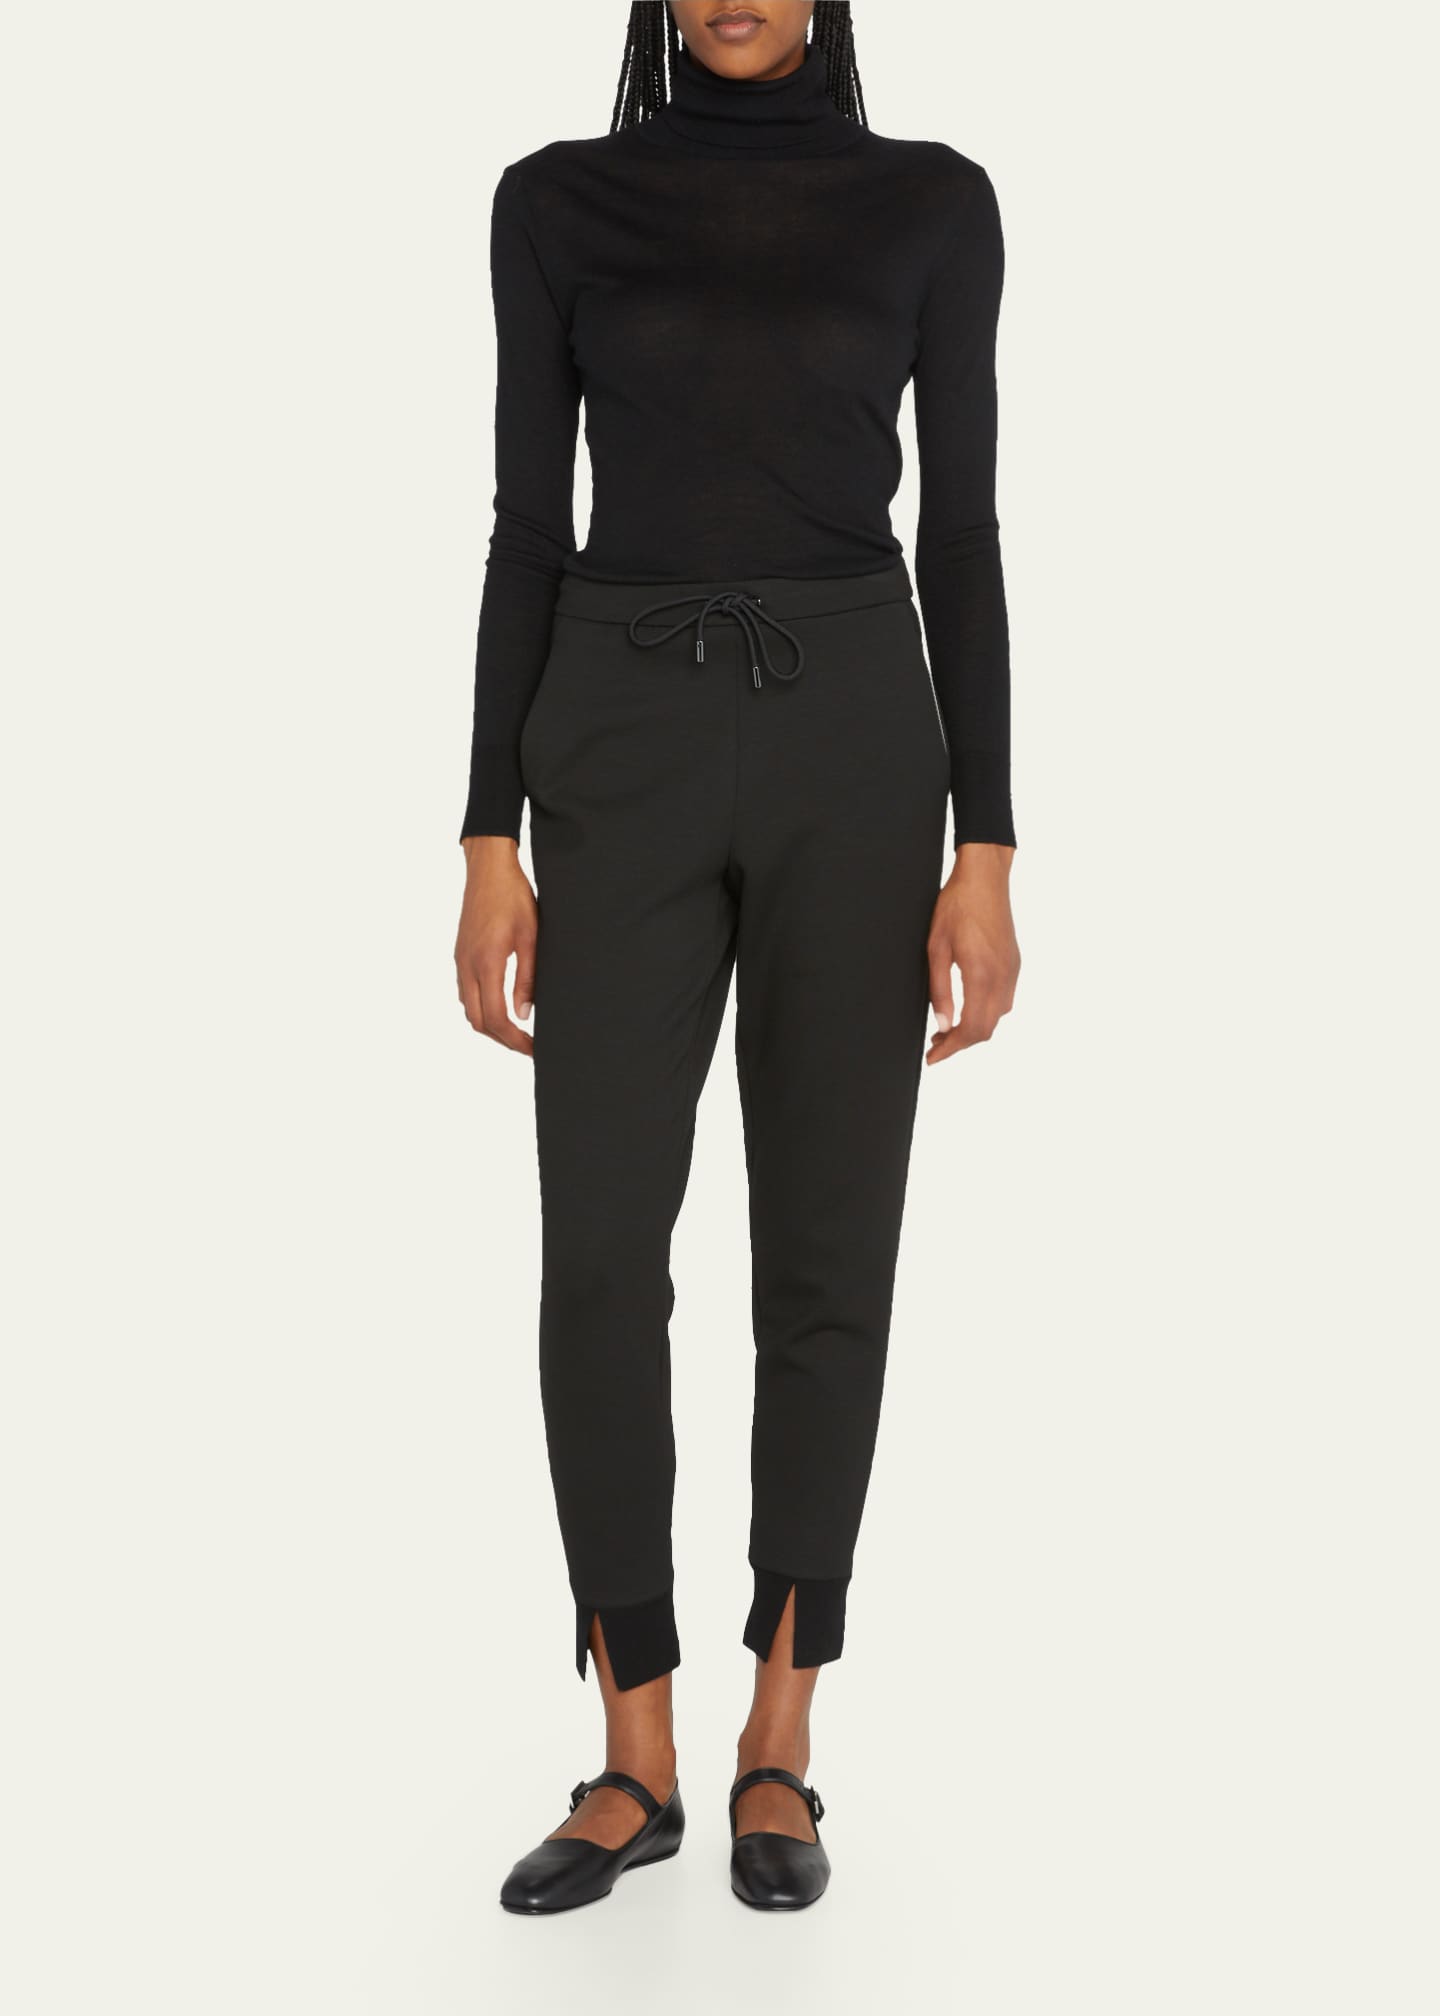 Theory Slouchy Double-Knit Jogger Pants - Bergdorf Goodman